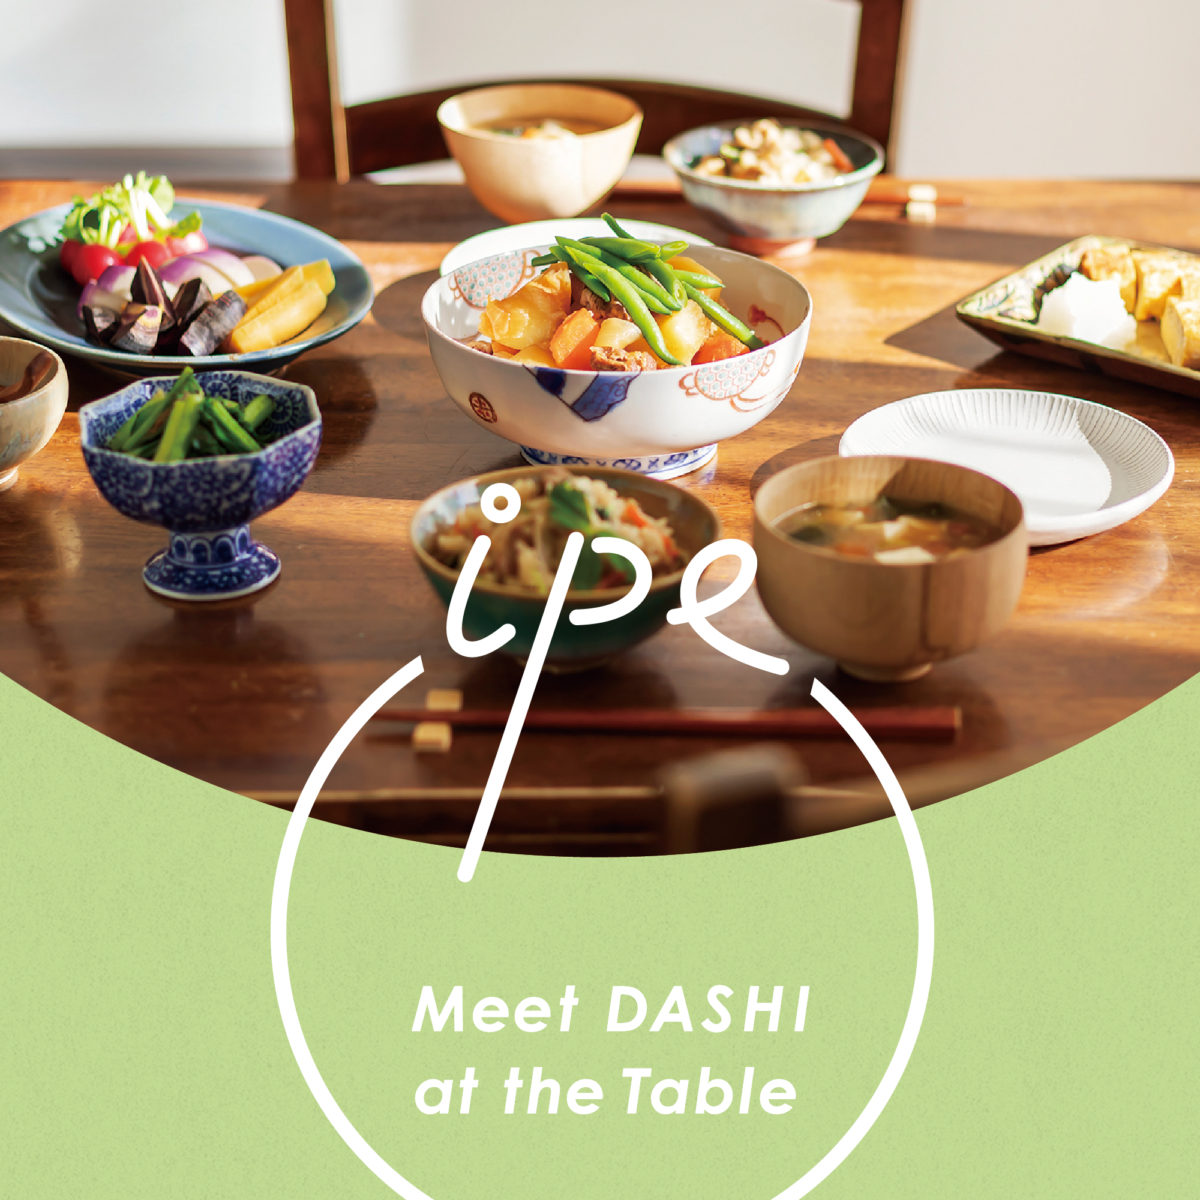 ipe -DASHI AT THE TABLE-